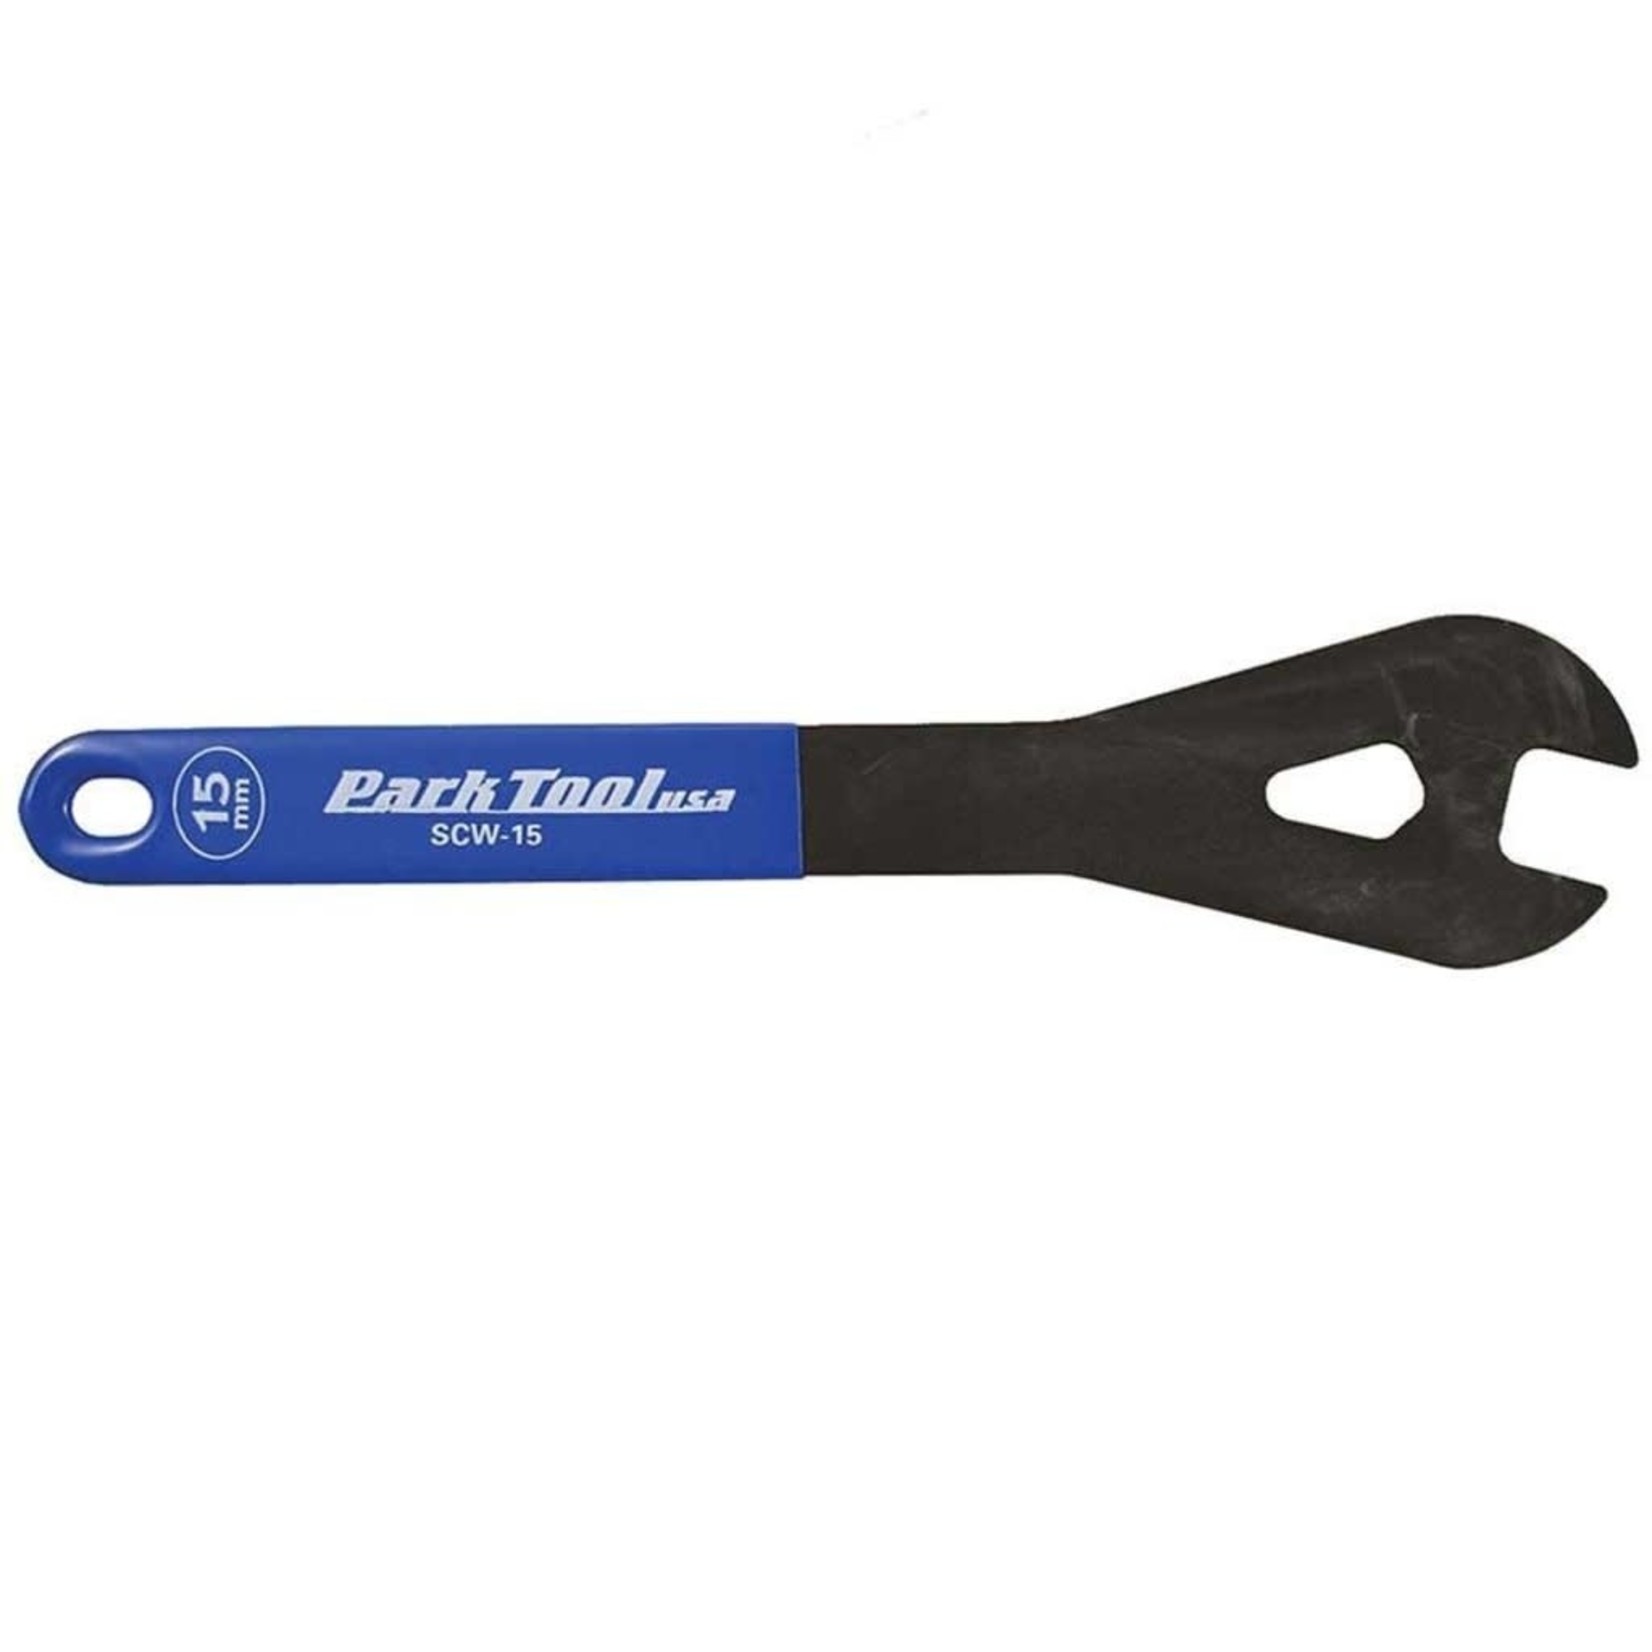 Park Tool Park Tl, SCW-15, Shp cne wrench, 15mm